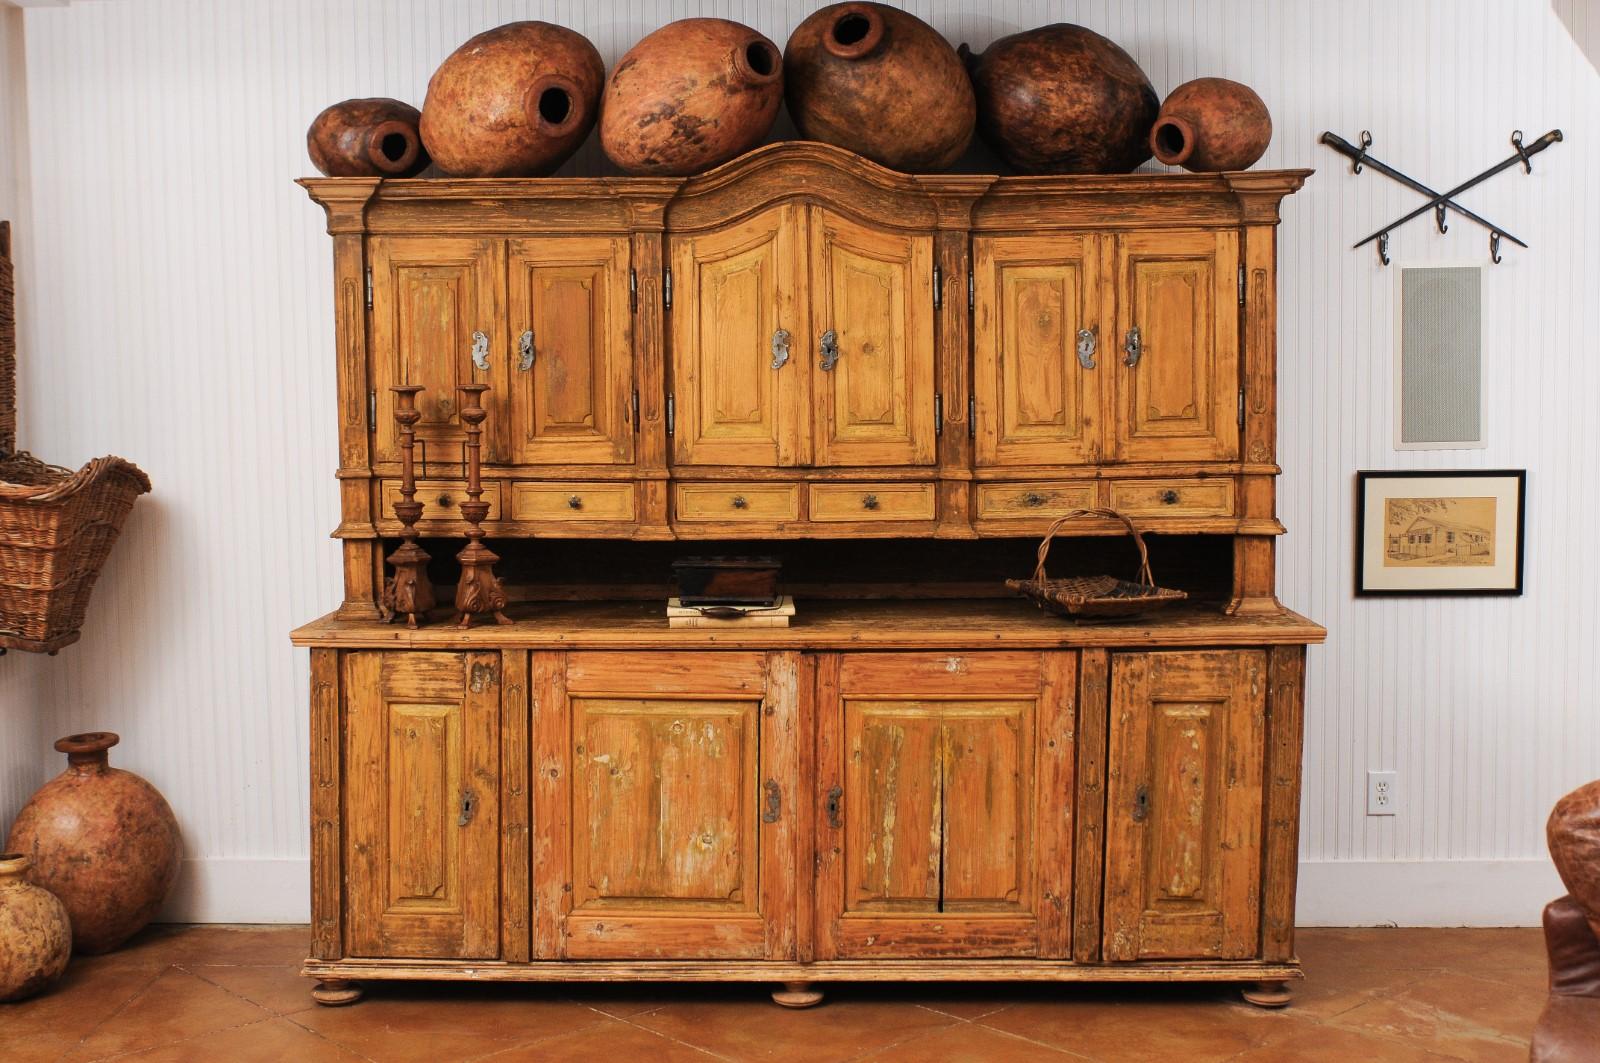 A large late 18th century French buffet à deux-corps in fir wood from a monastery near Avignon. Created in Southern France during the last decade of the 18th century, this buffet à deux-corps attracts our attention with its wonderfully weathered